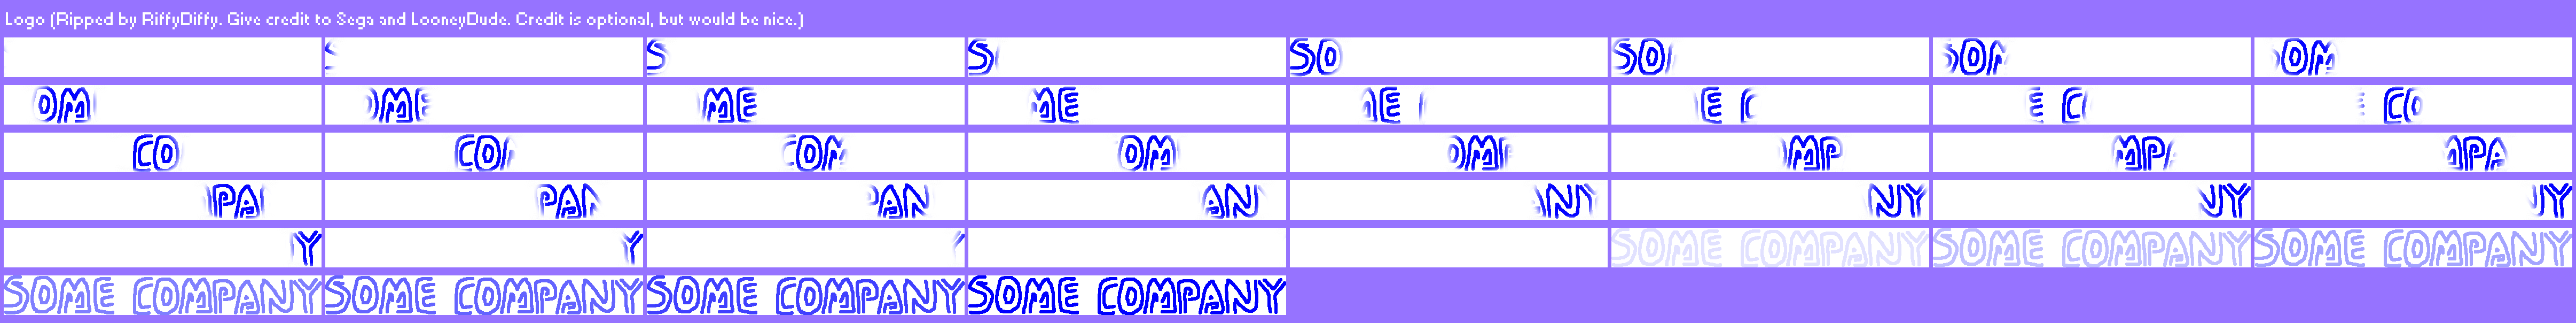 Sunky the Game (Part 1) - "Some Company" Logo